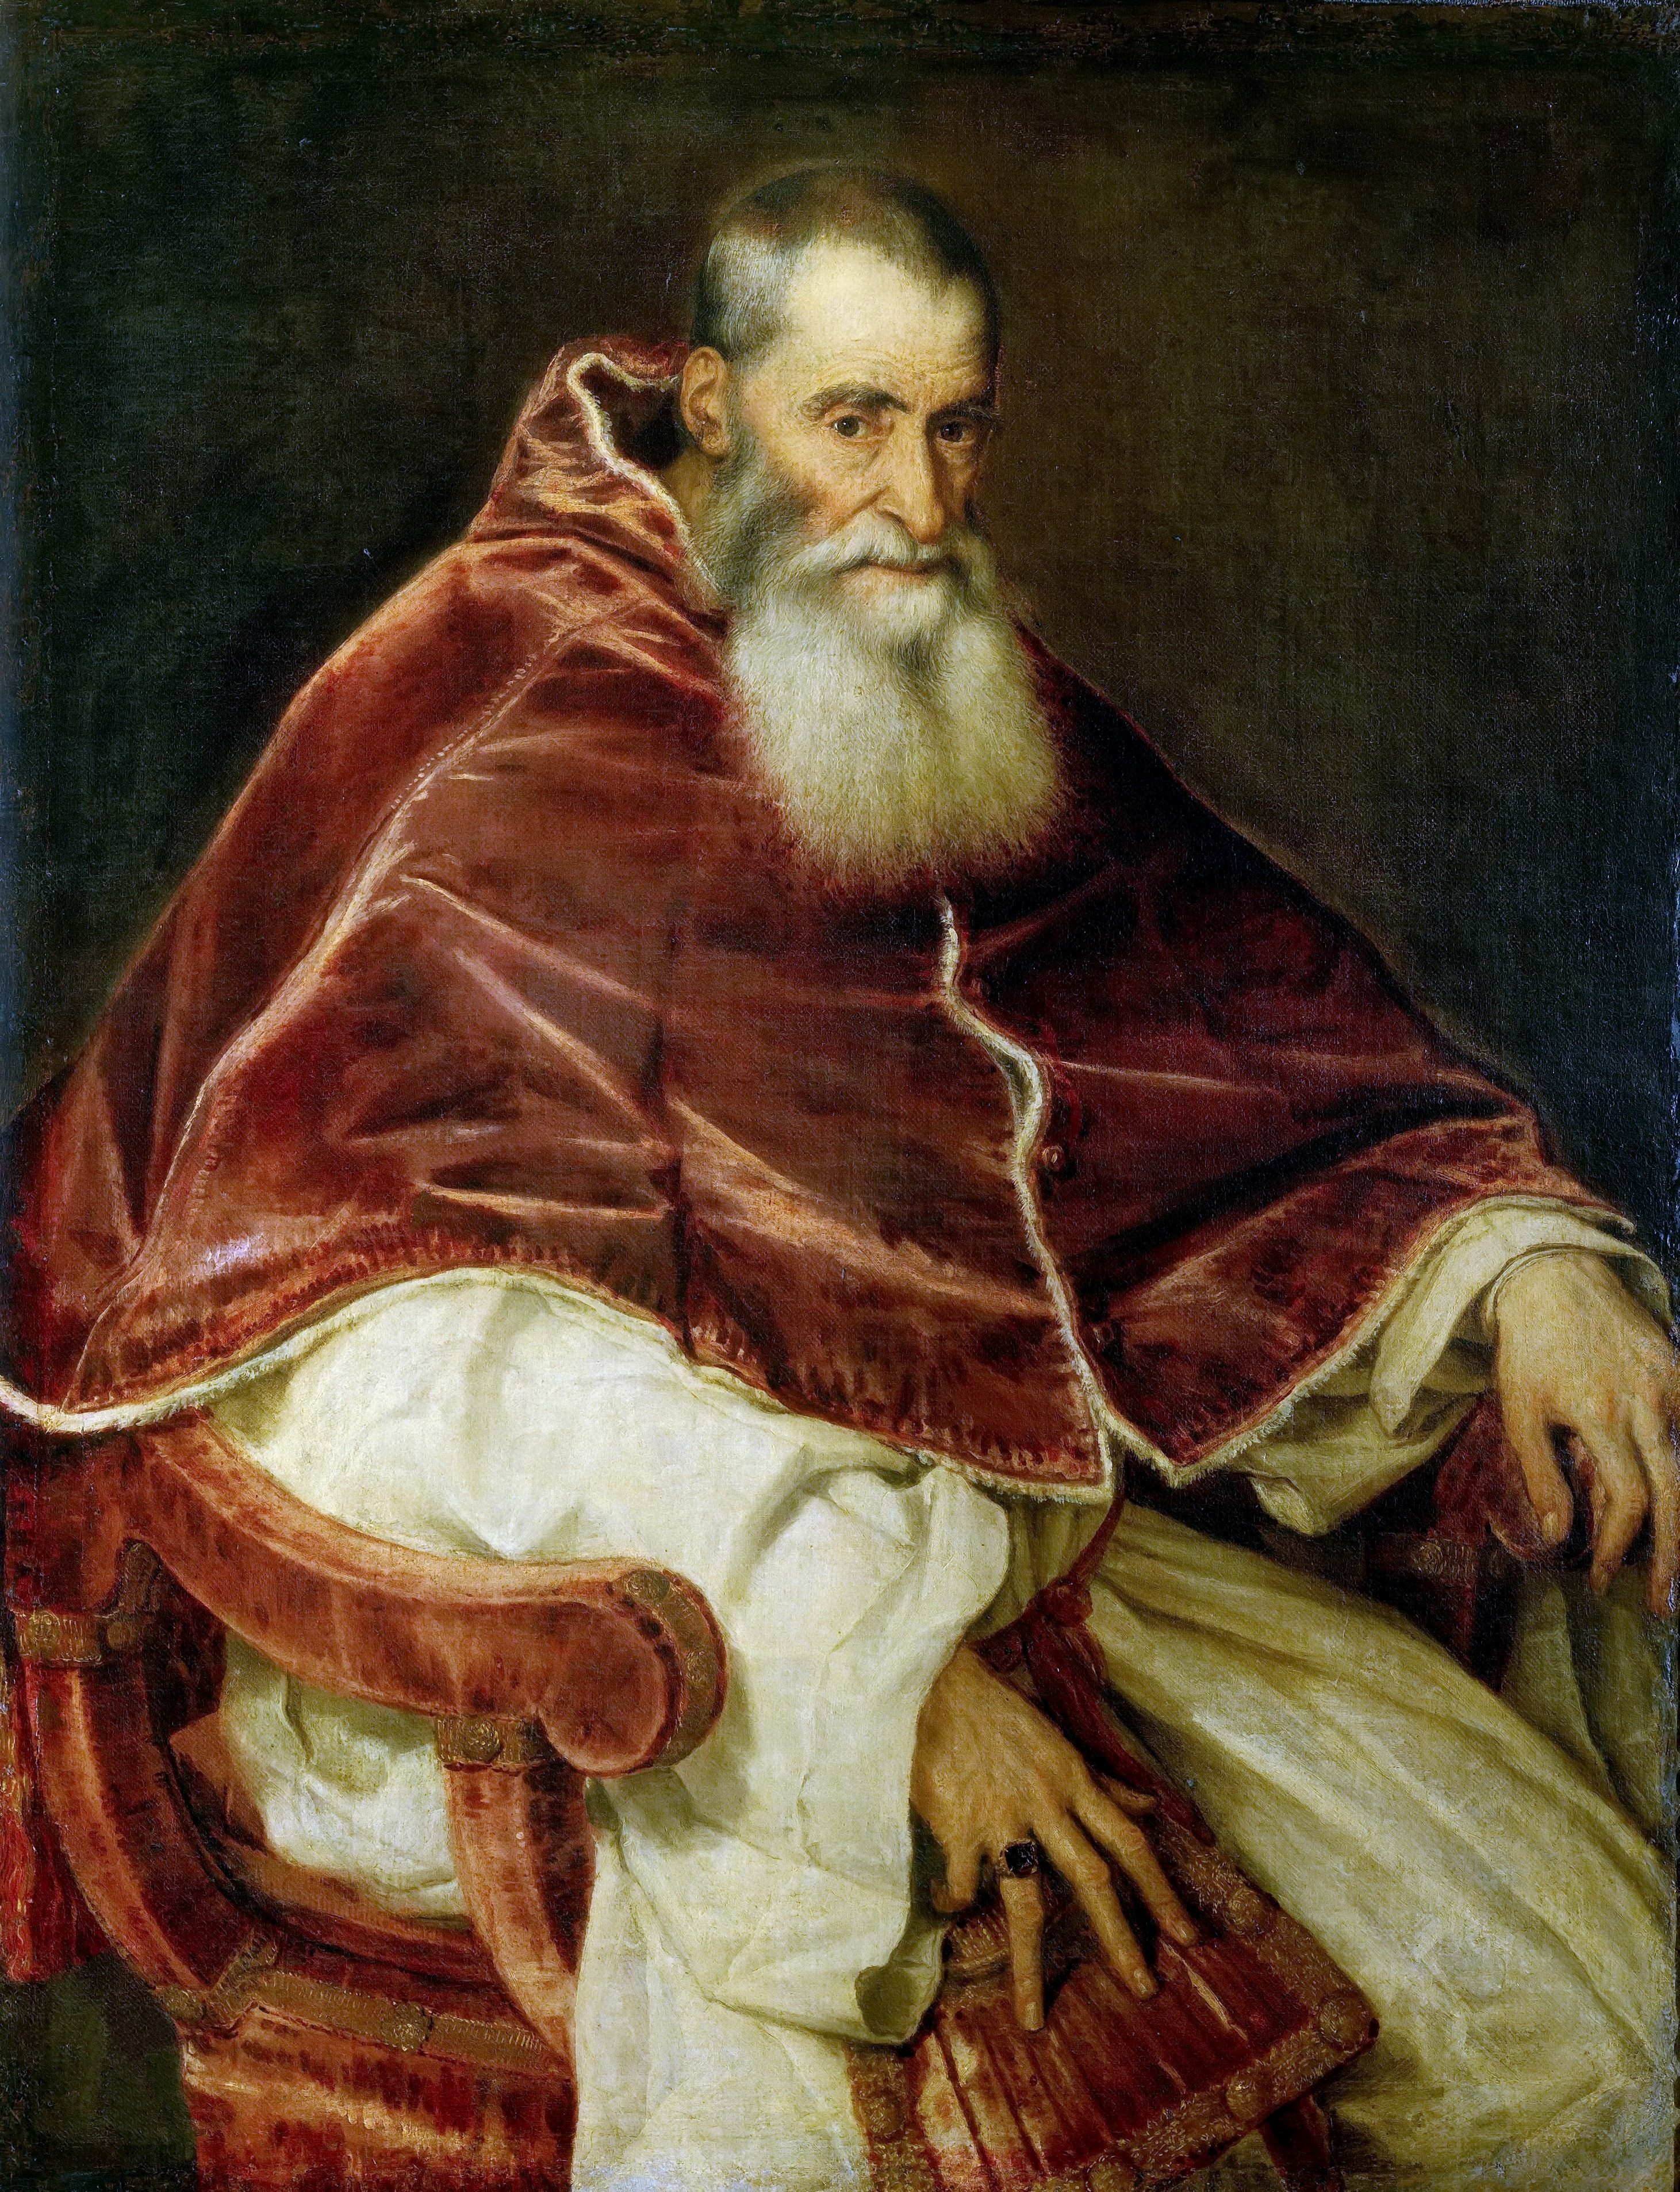 Portrait_of_Pope_Paul_III_Farnese_(by_Titian)_-_National_Museum_of_Capodimonte